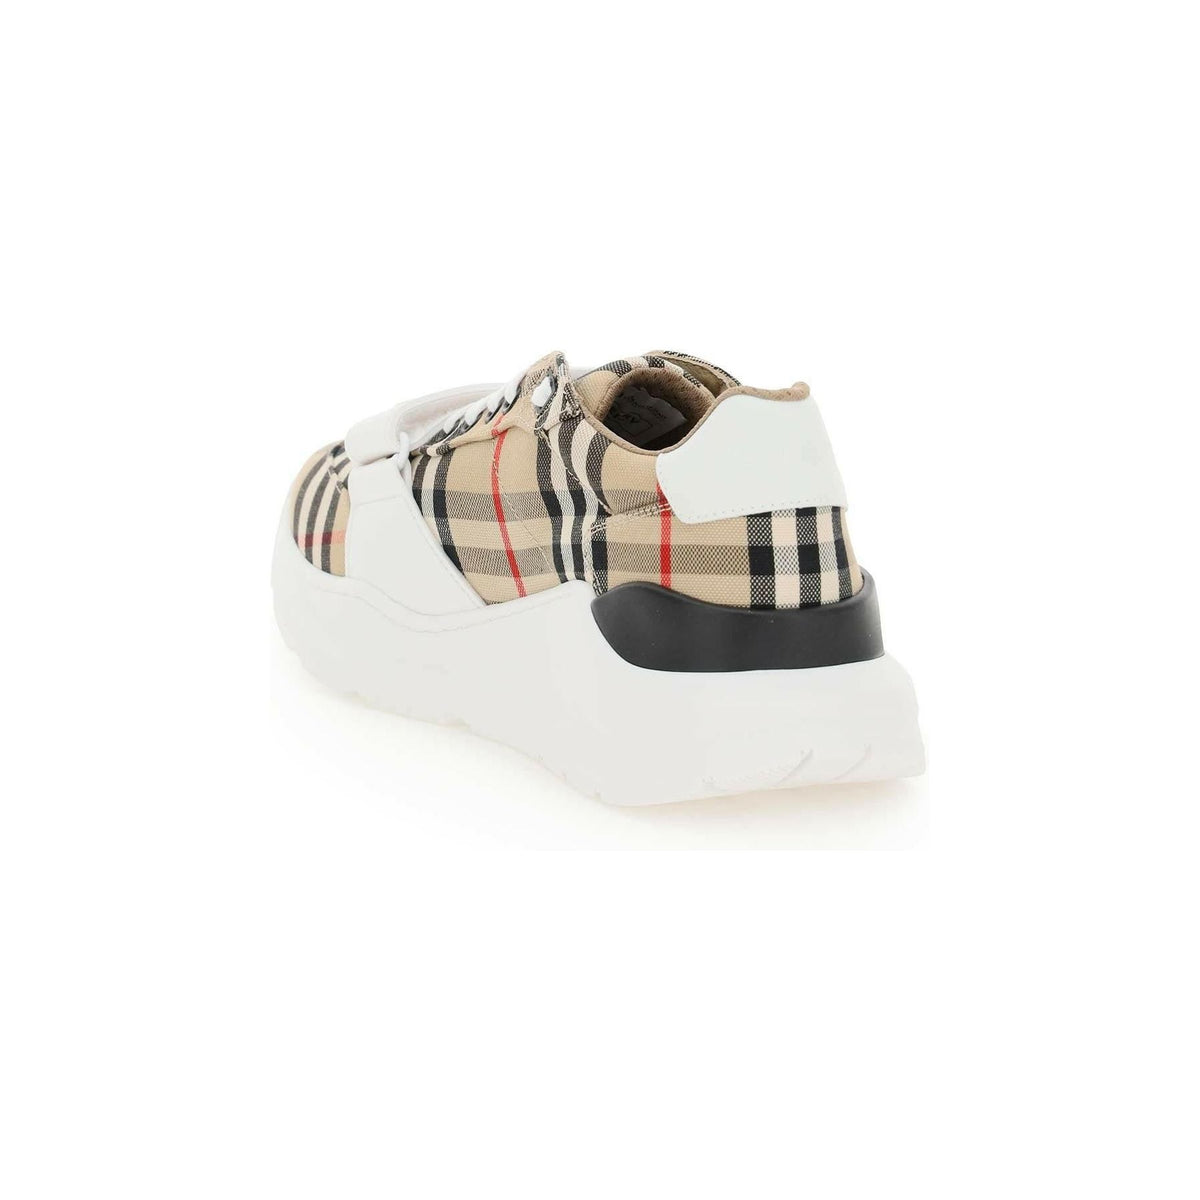 BURBERRY - Archive Beige Regis Check, Suede and Leather Sneakers - JOHN JULIA